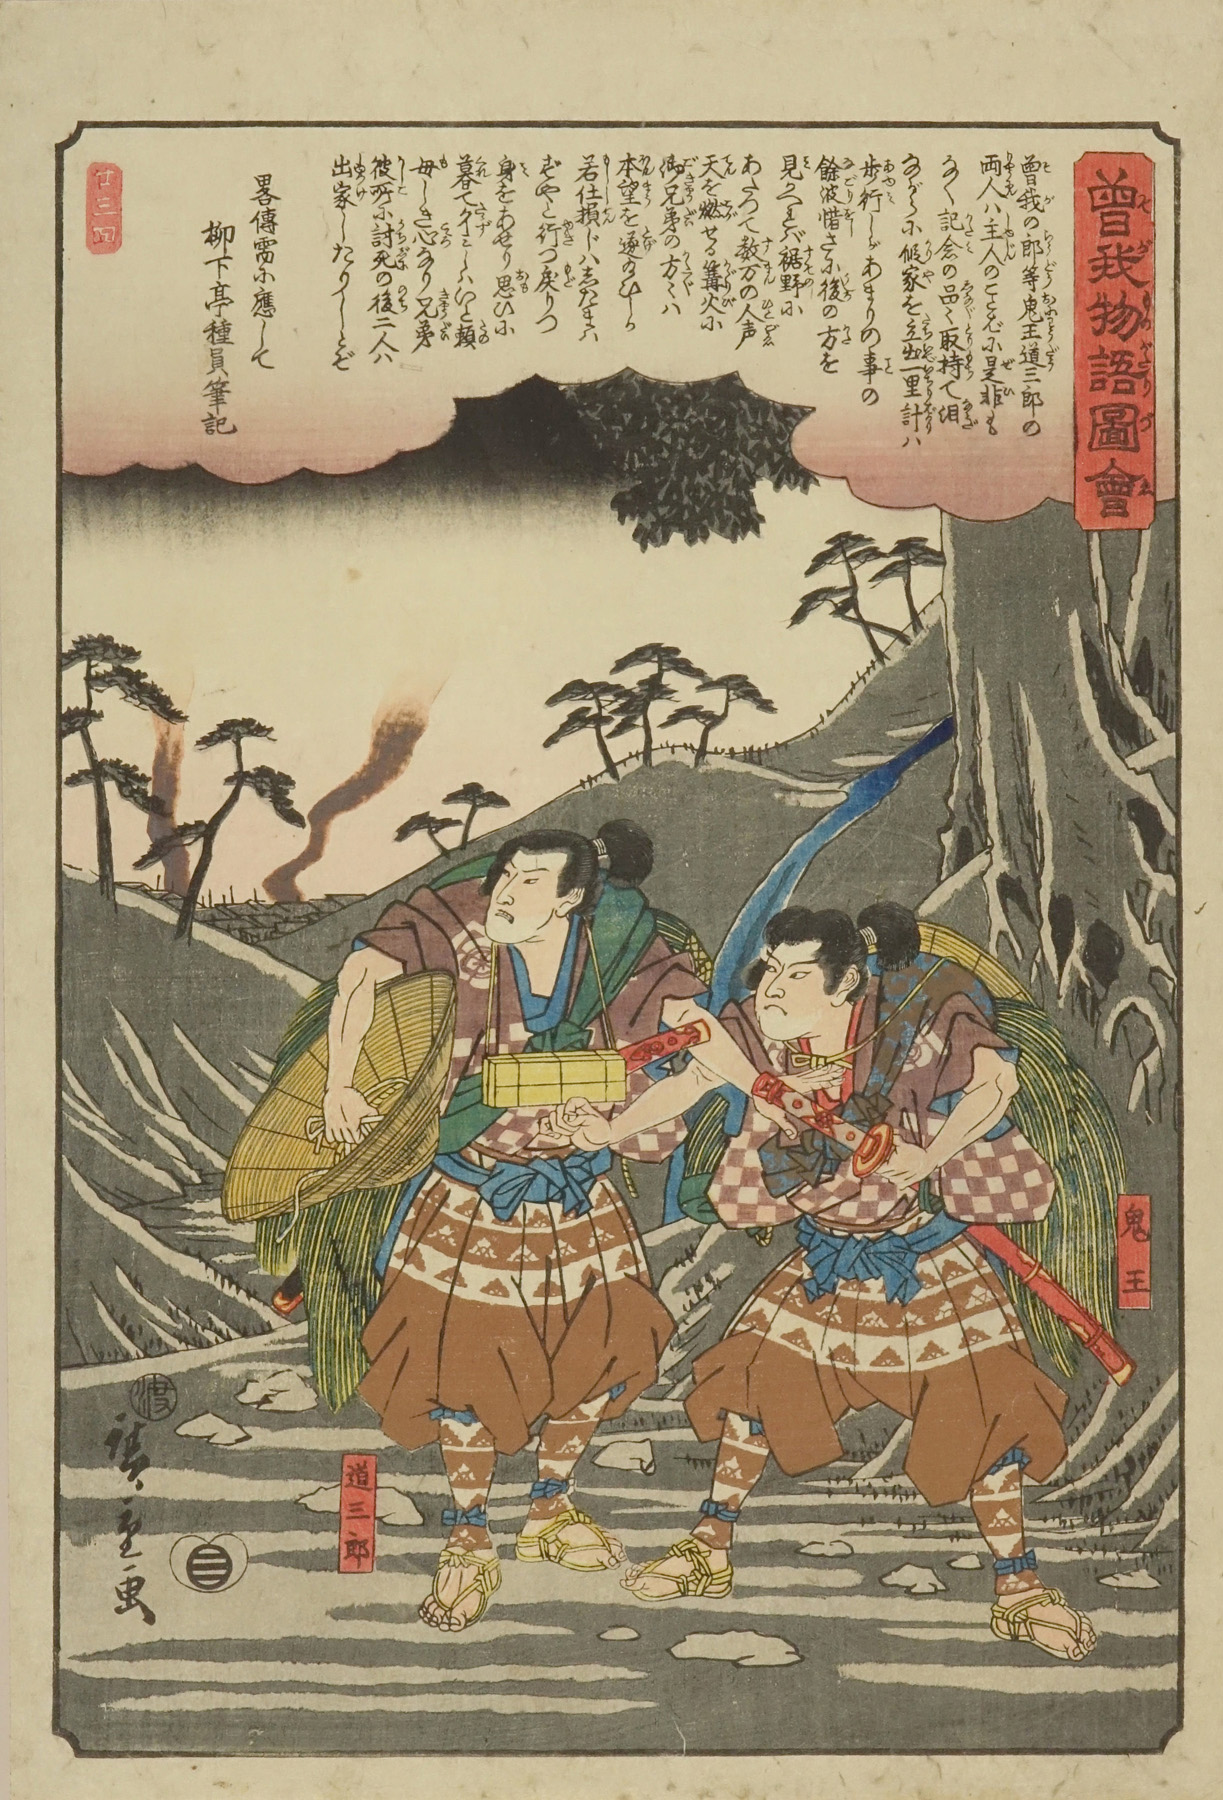 HIROSHIGE Soga monogatari zue (Pictures of the tale of Soga